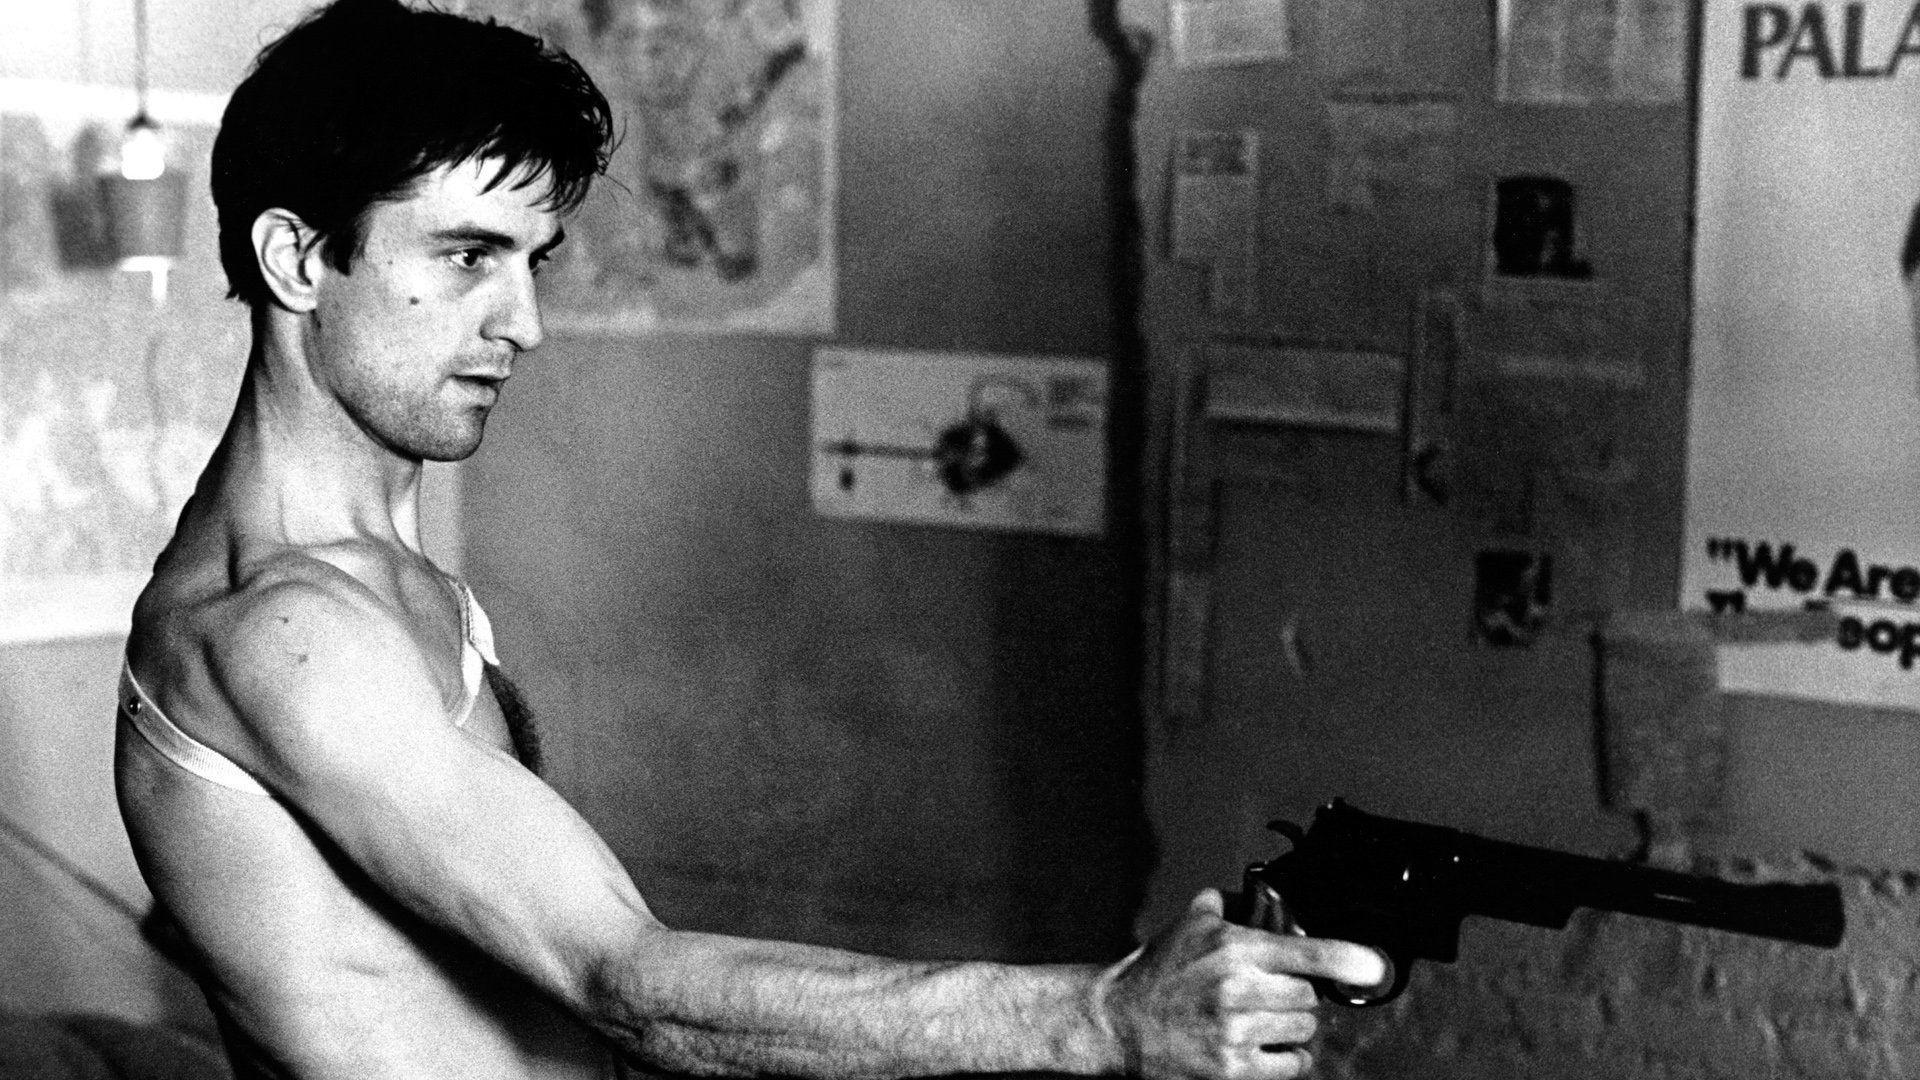 Download Taxi Driver Wallpaper Gallery